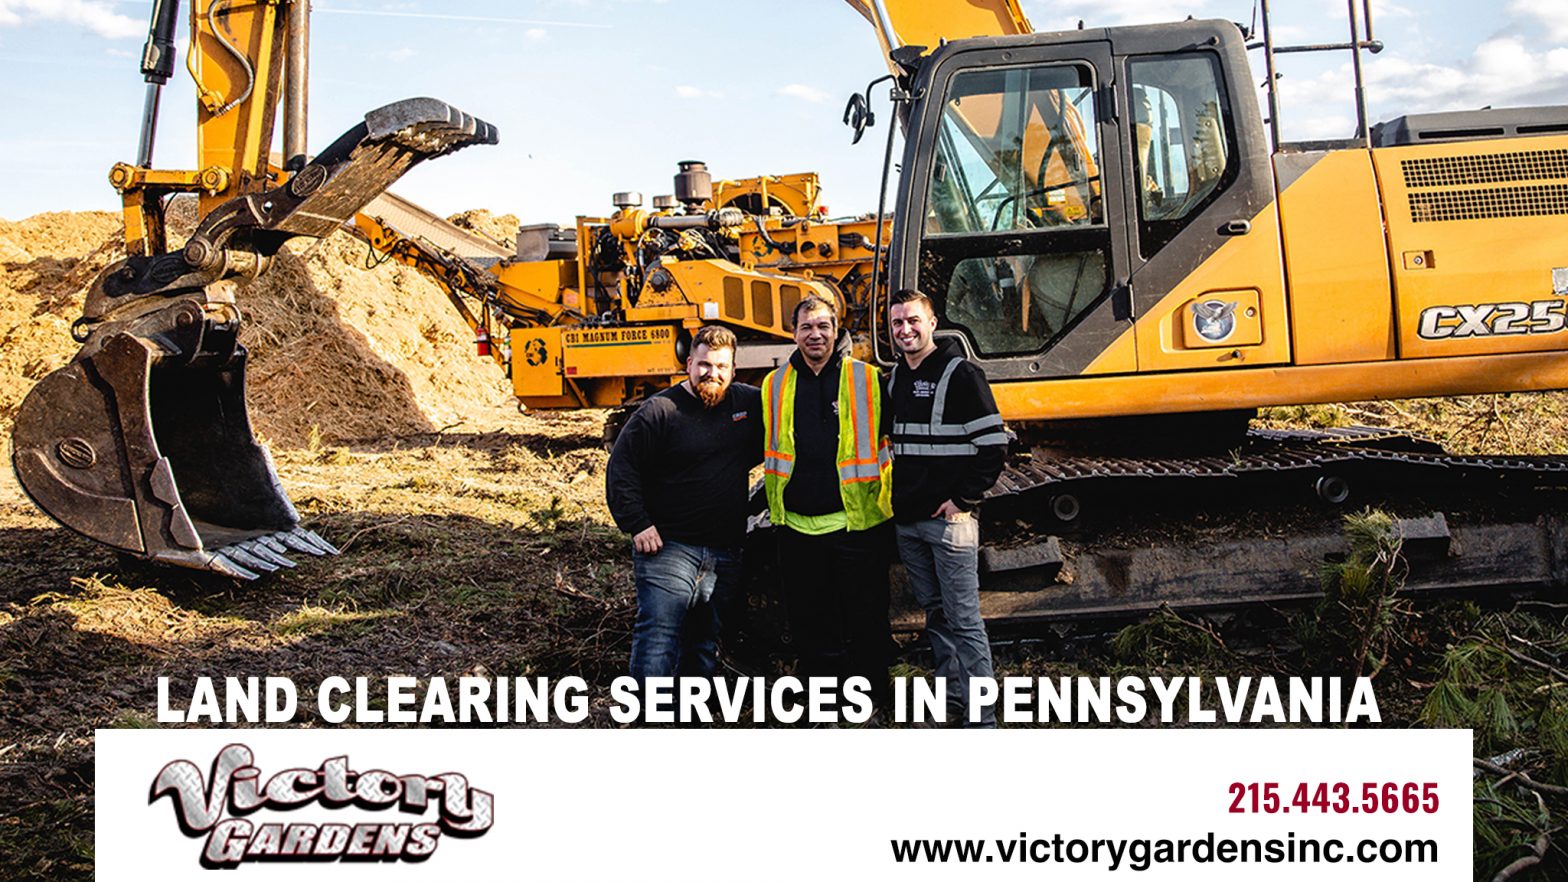 Land Clearing Services in Pennsylvania